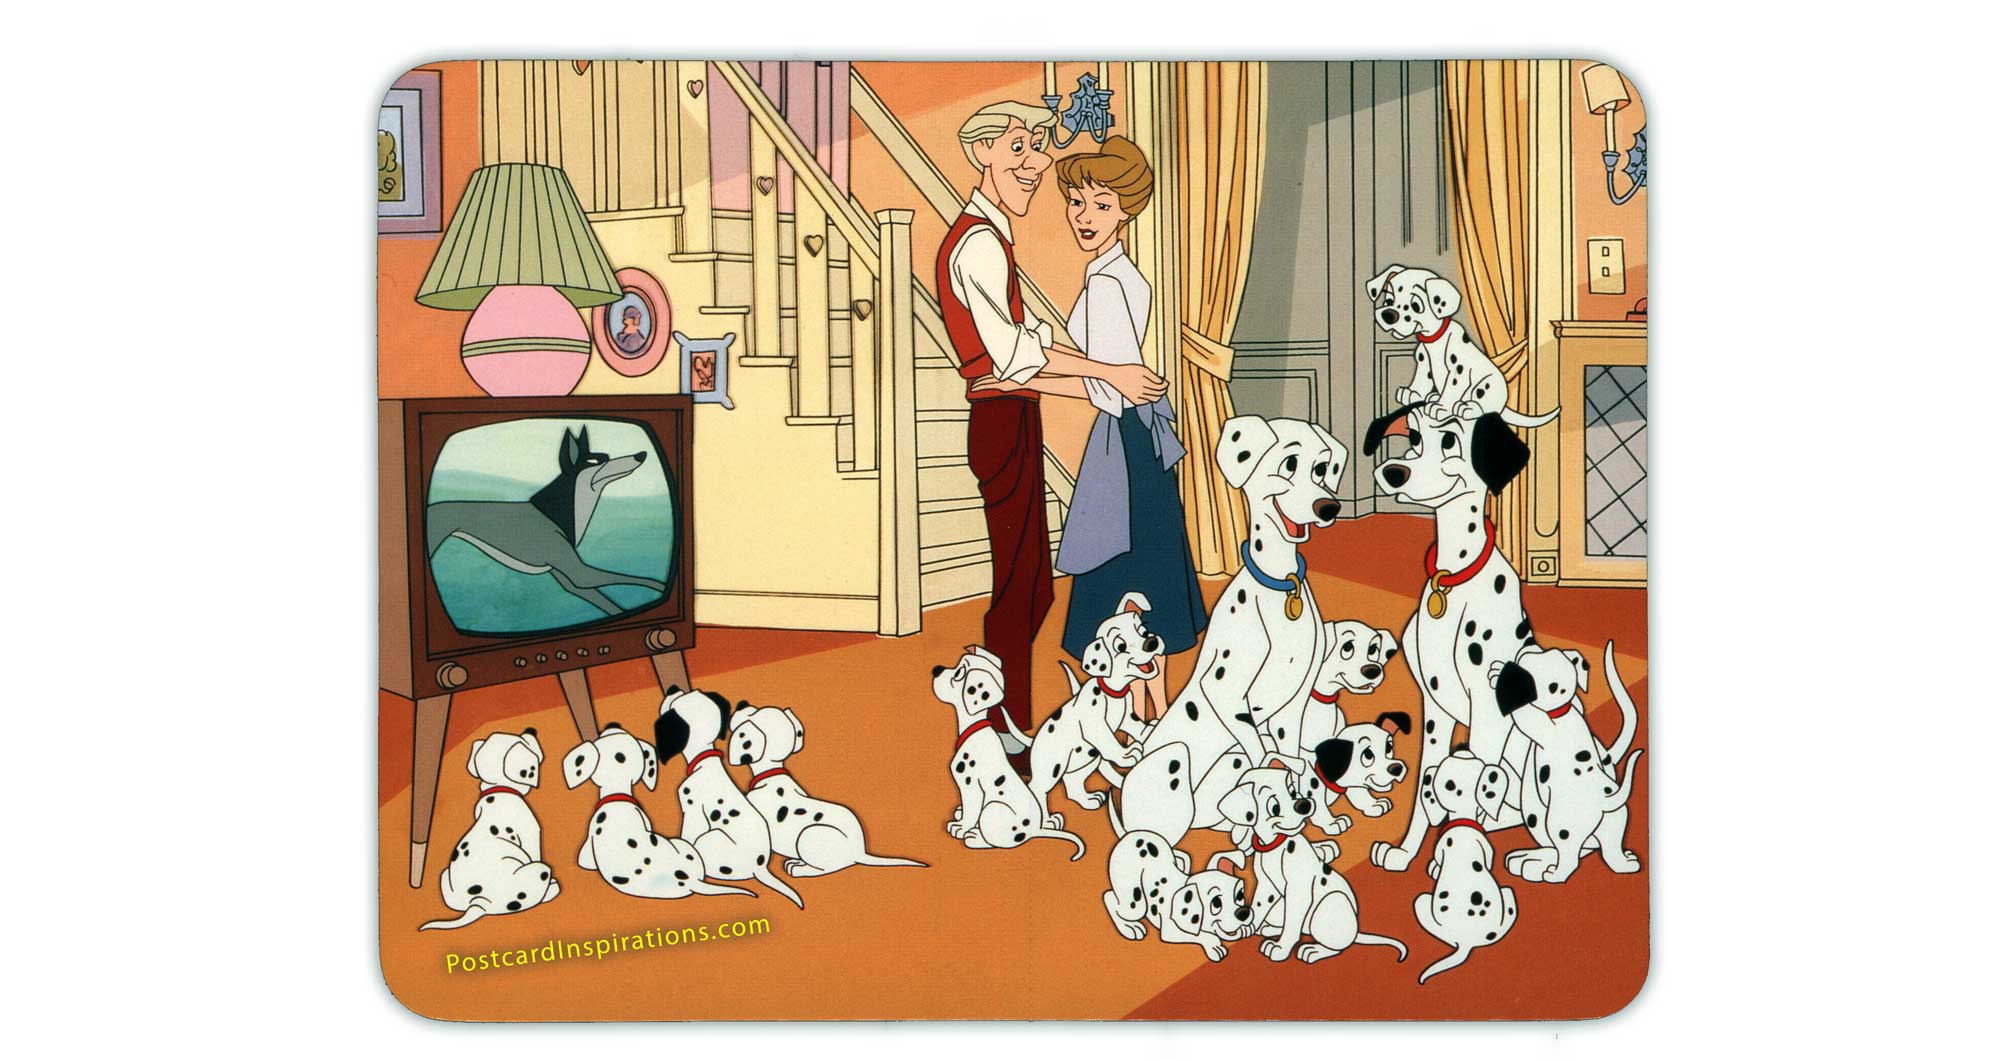 The One Hundred and One Dalmatians